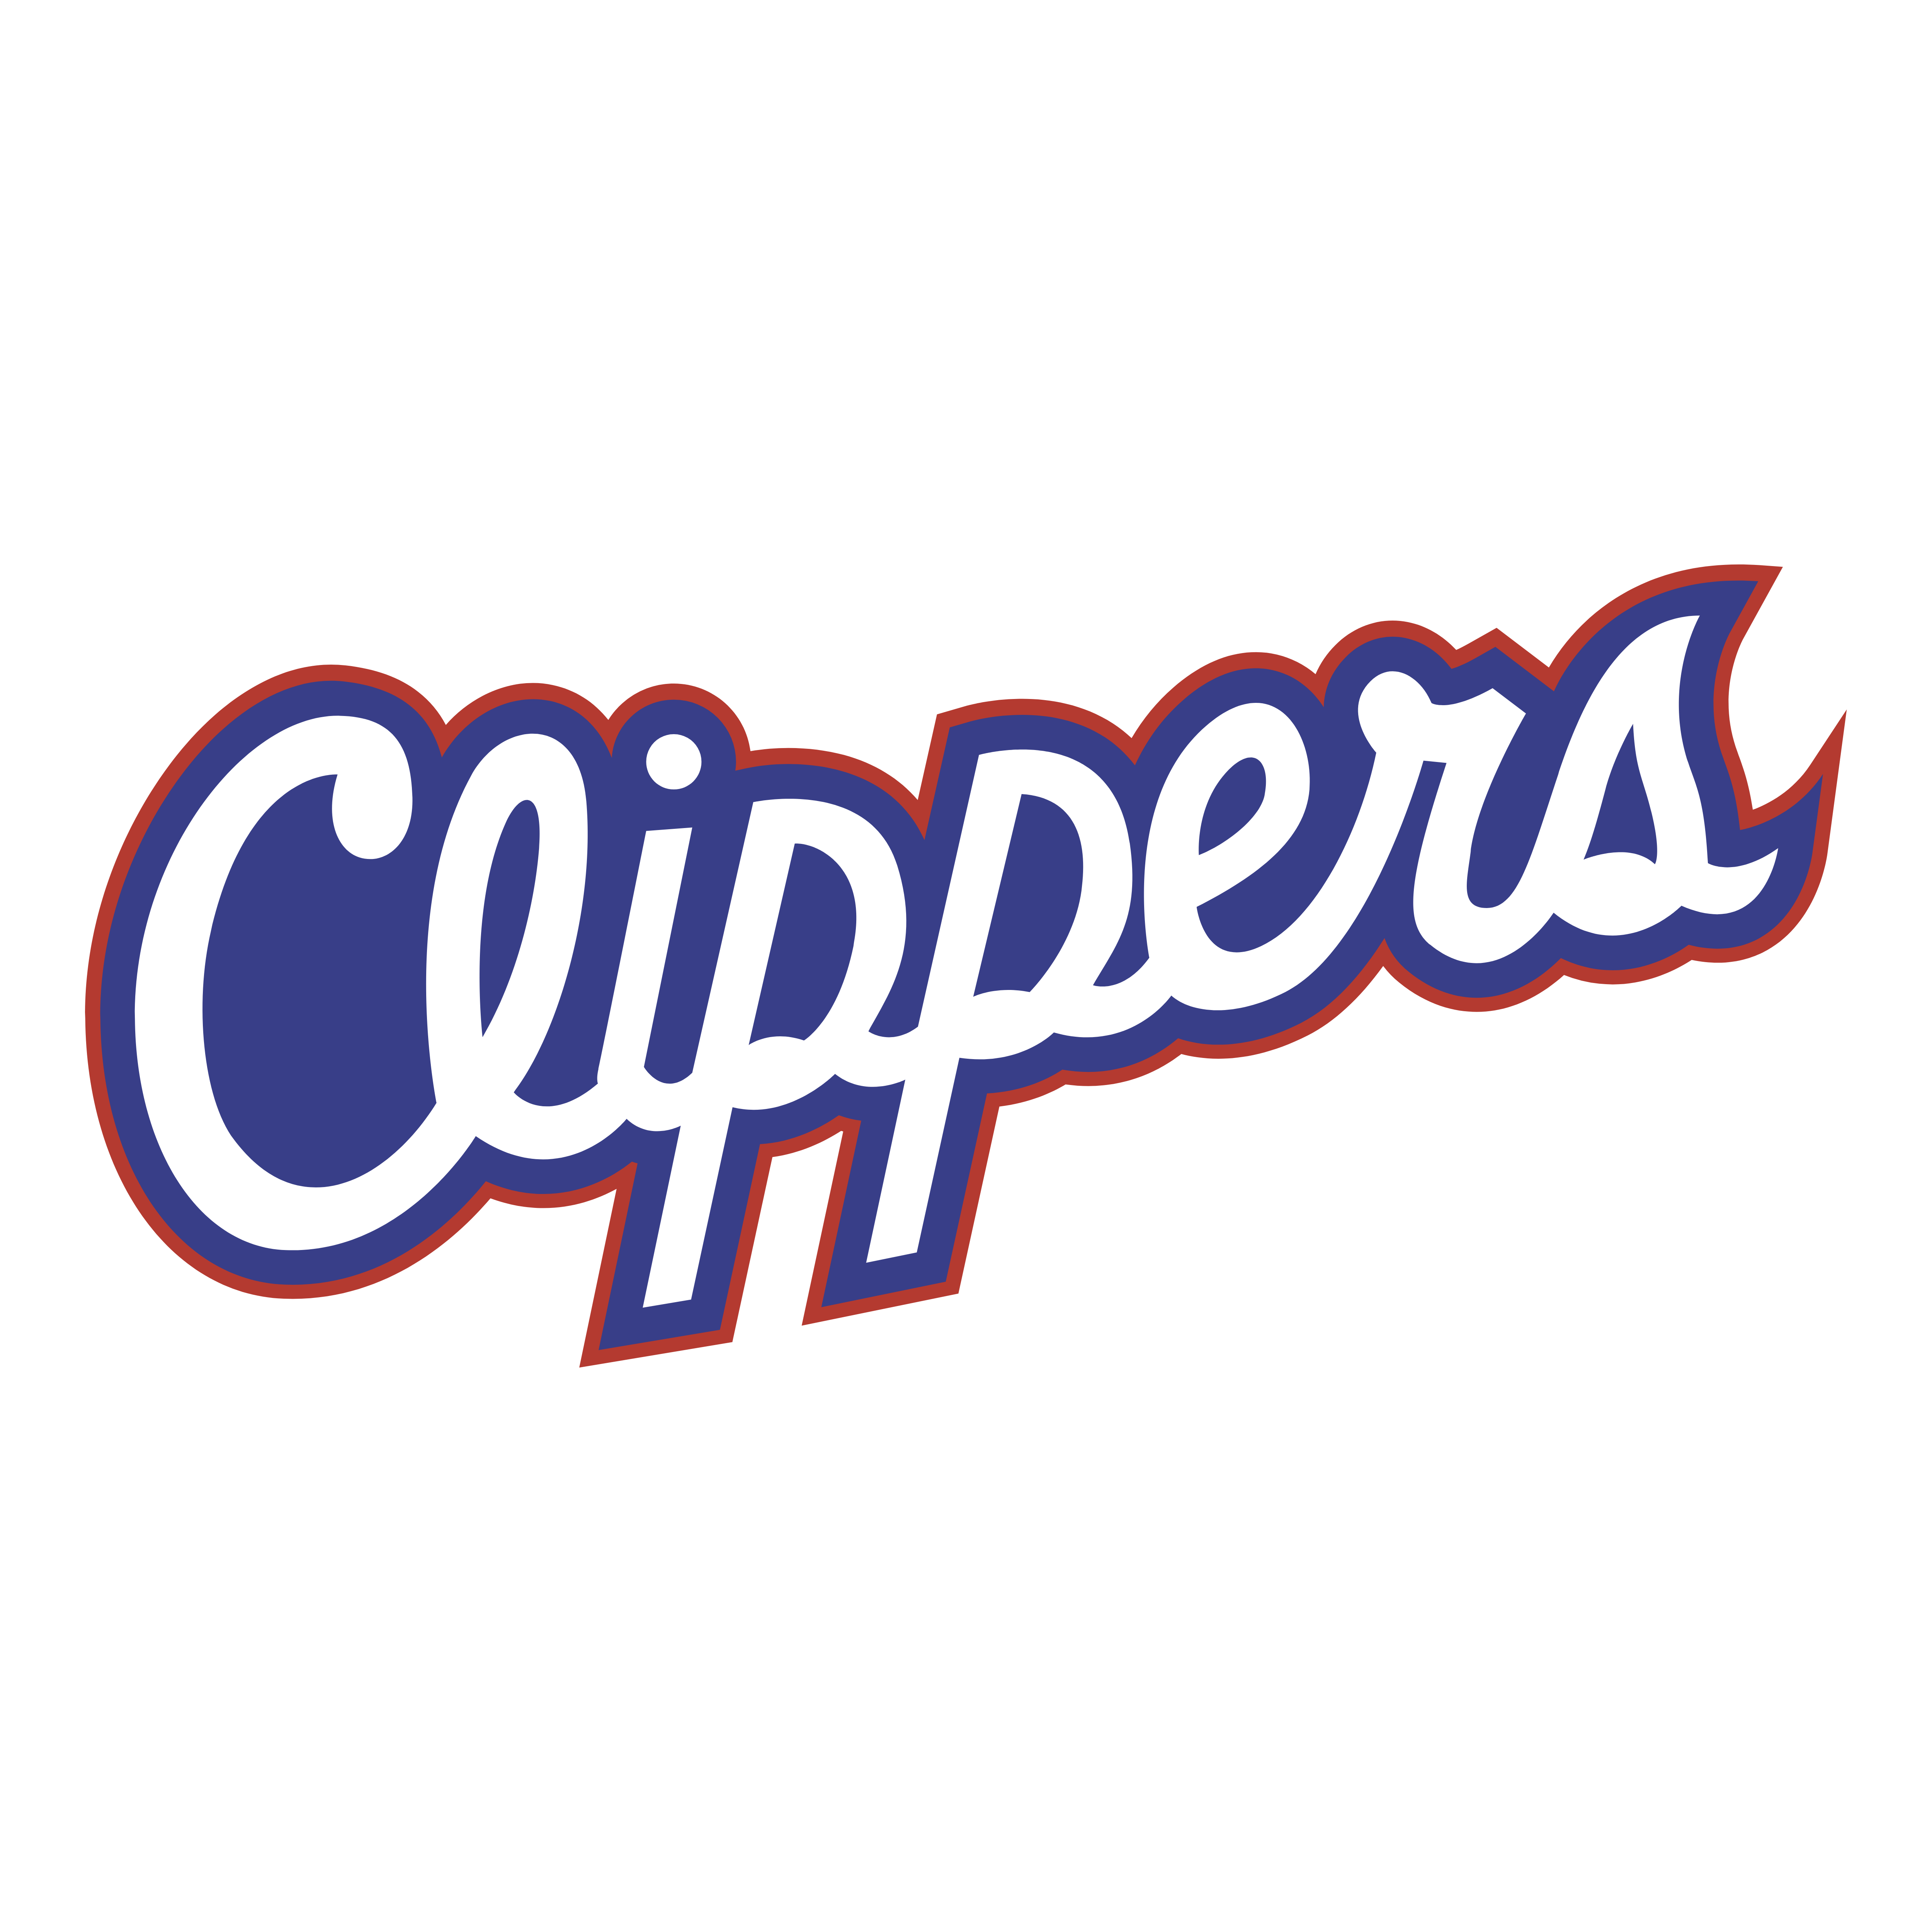 Clippers Logo - Los Angeles Clippers – Logos Download